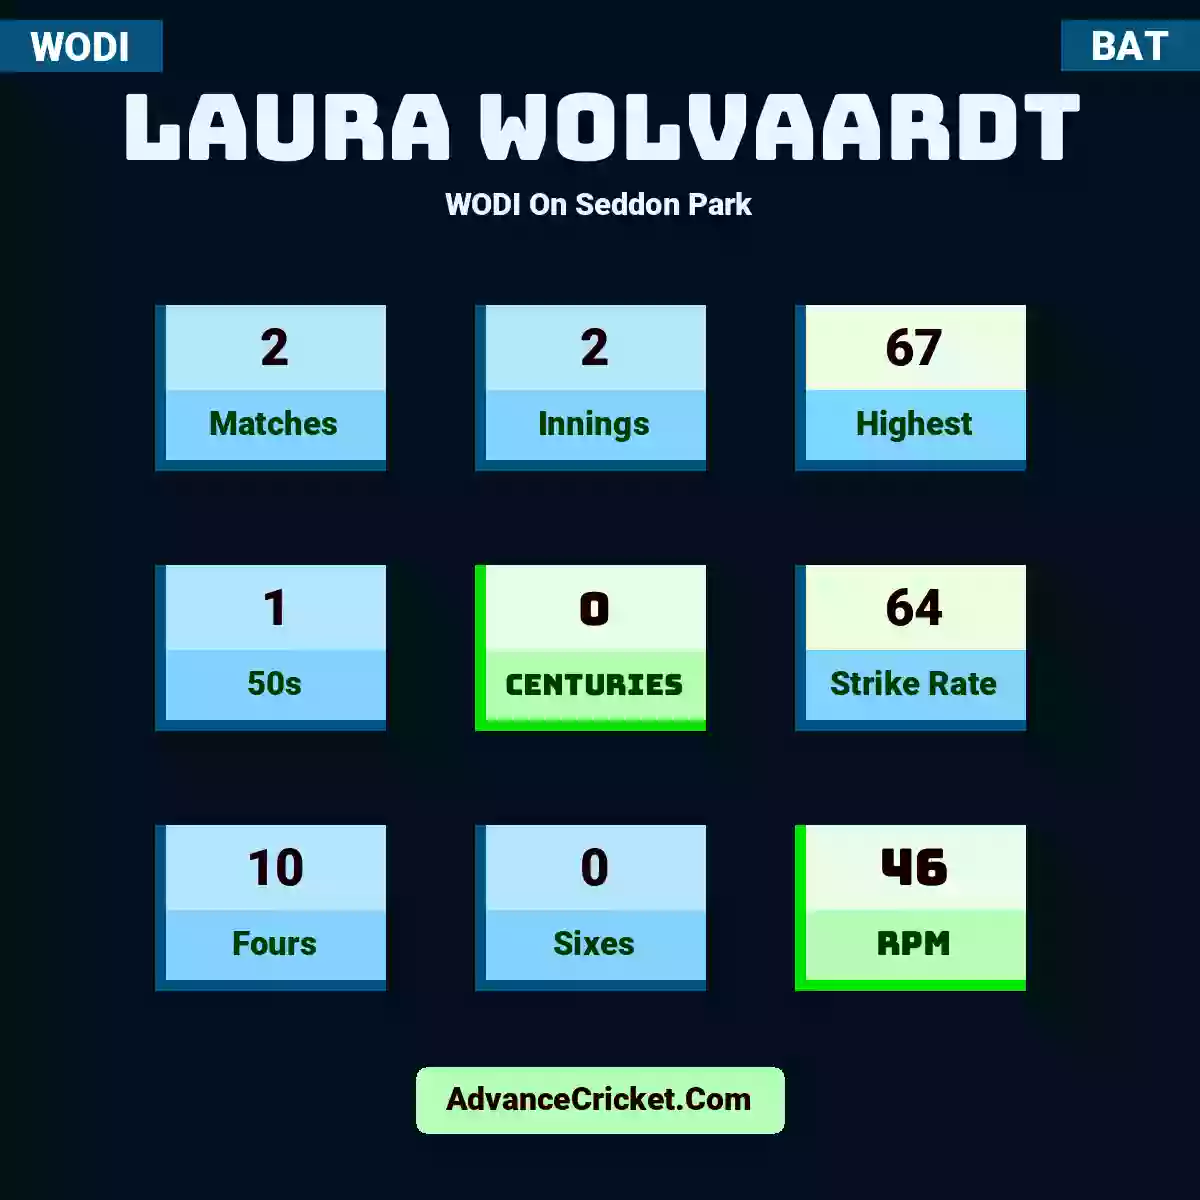 Laura Wolvaardt WODI  On Seddon Park, Laura Wolvaardt played 2 matches, scored 67 runs as highest, 1 half-centuries, and 0 centuries, with a strike rate of 64. L.Wolvaardt hit 10 fours and 0 sixes, with an RPM of 46.